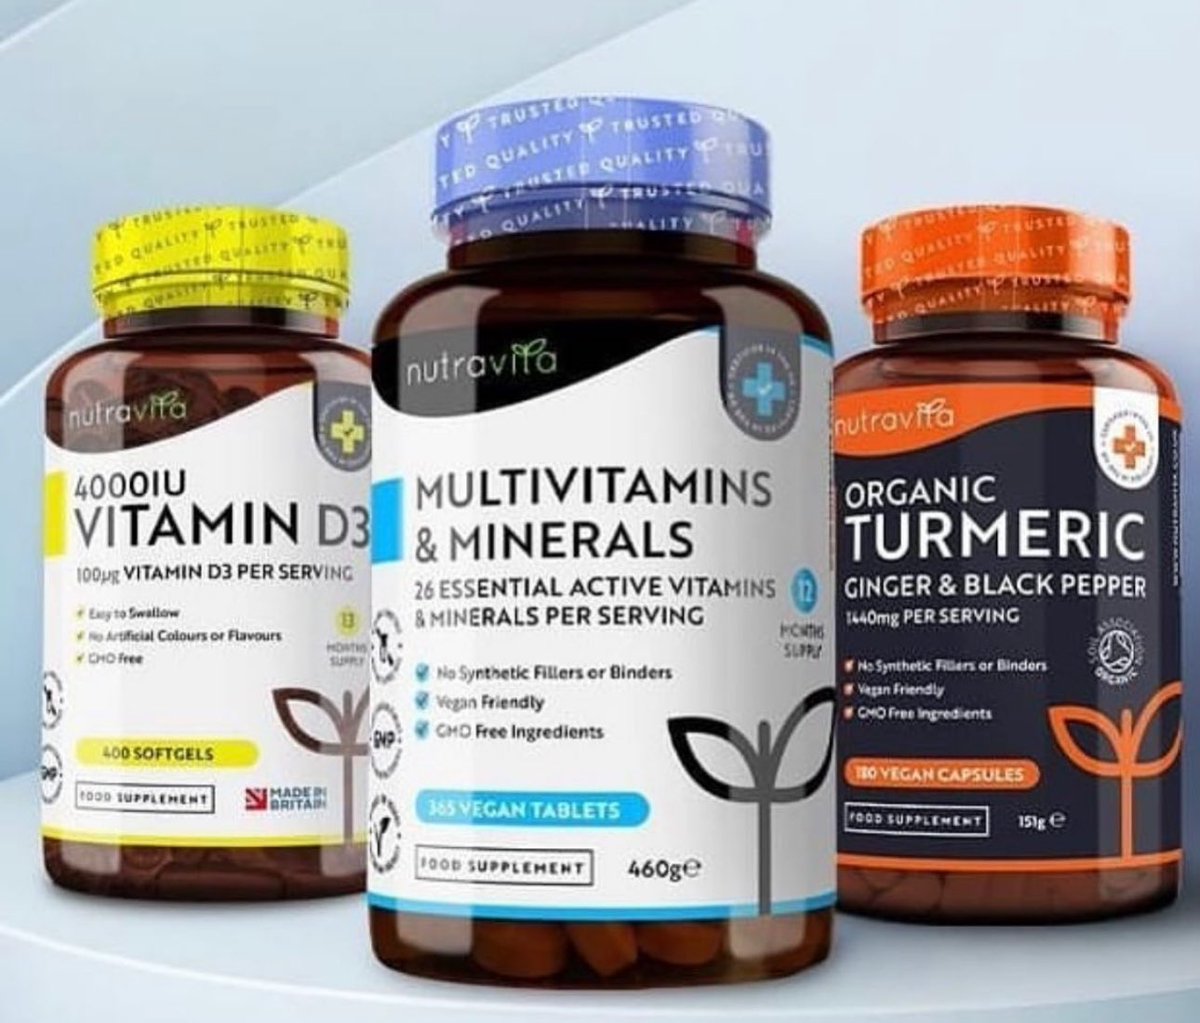 nutravita_uk ❤️
 #code ✨HCLUBUUU33 ✨for an EXTRA 1️⃣0️⃣% off at nutravita.co.uk ❤️
(19 /05)
#discountcodes #supplements #fitness #bodybuilding #nutritious #workouts #healthylifestyle #nutravitamin #weightloss  #coupons #الهلال_العين #gymlovers #gymaddict #gymshark #sales